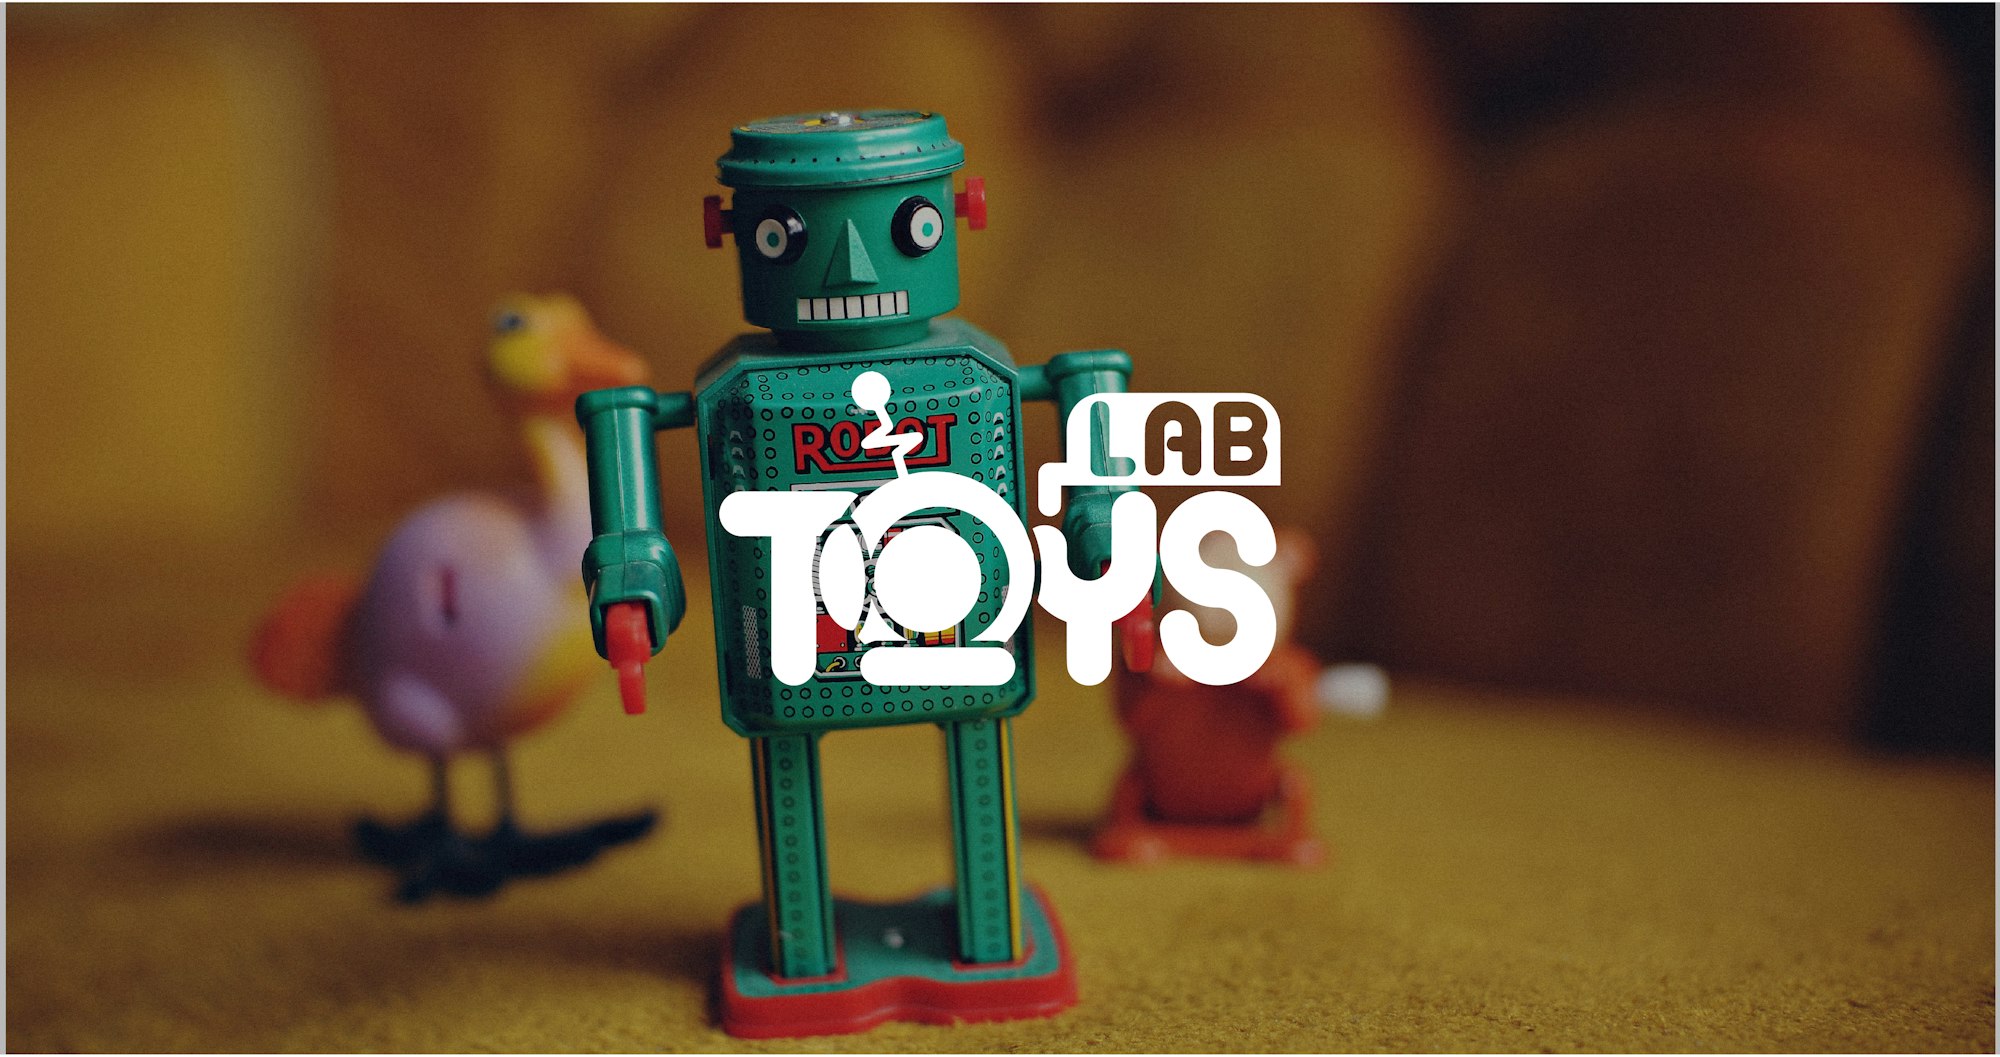 Cover Image for 興趣變事業　活用Reap Pay起步更穩 －Toys Lab HK